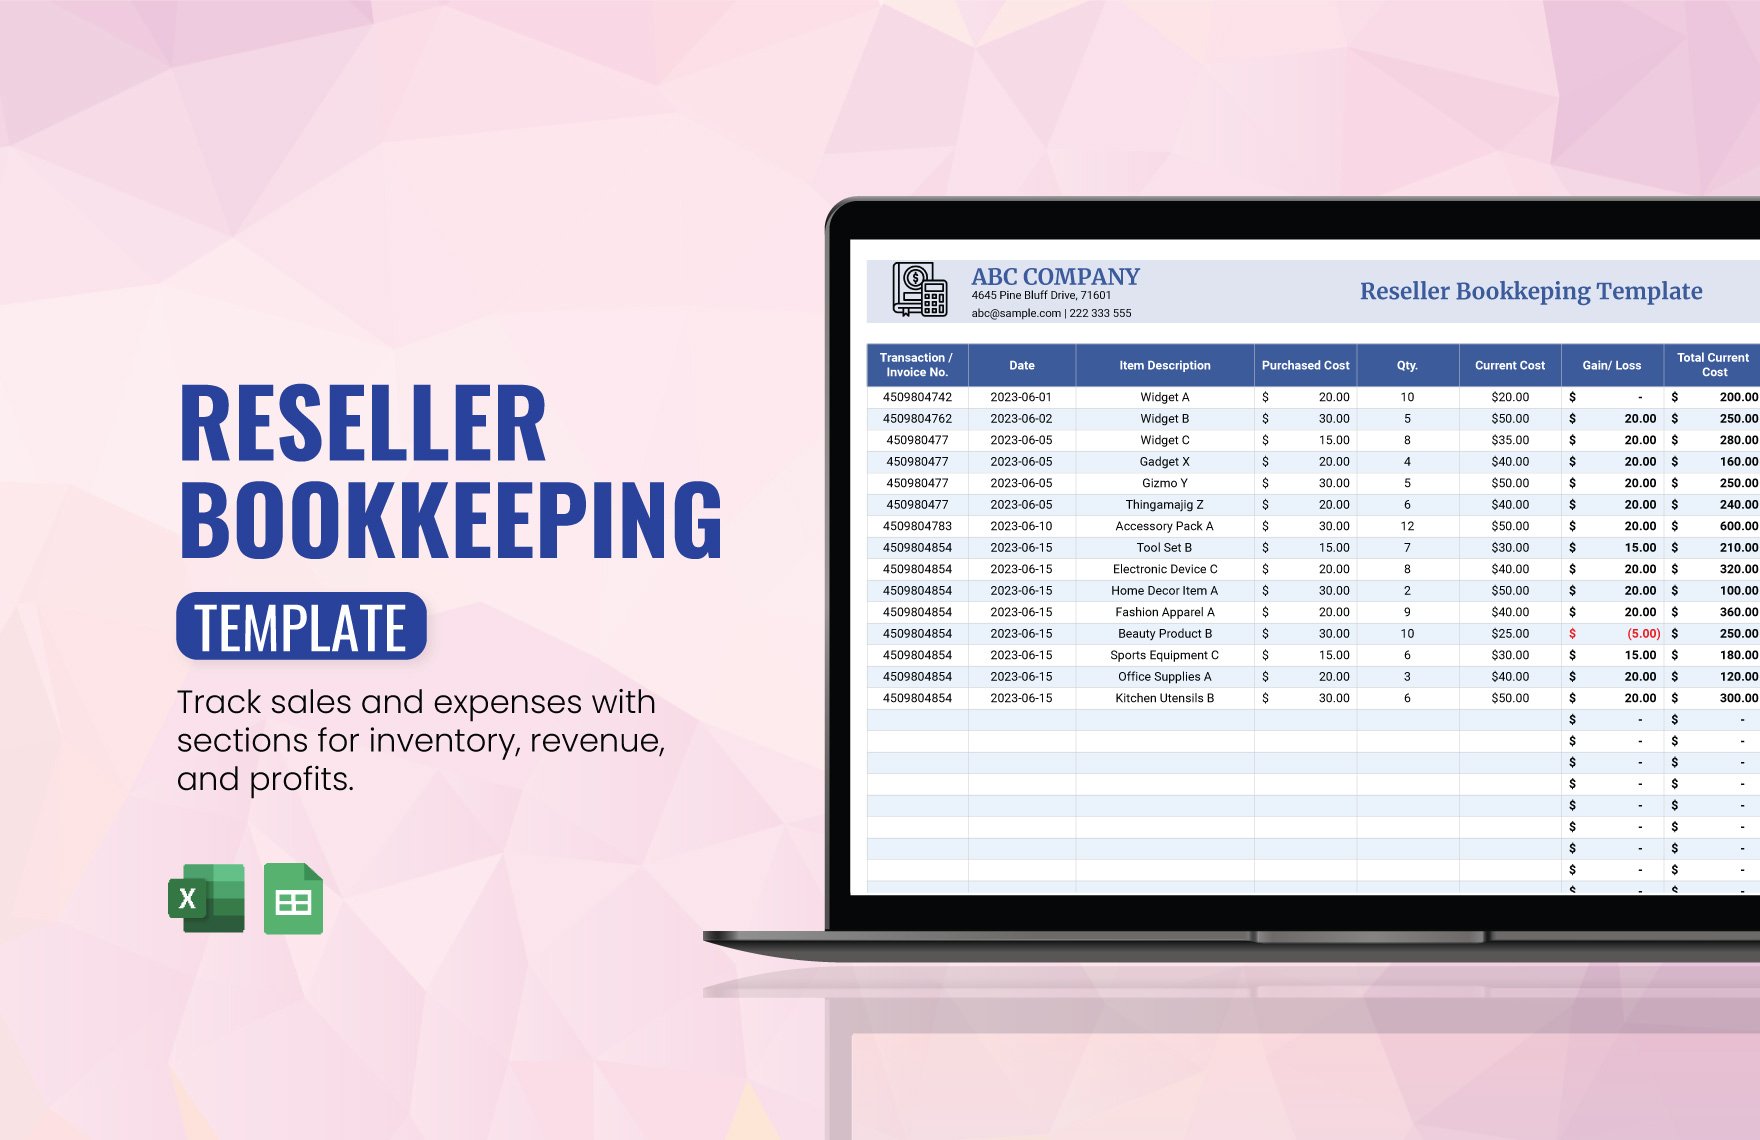 Reseller Bookkeeping Template in Excel, Google Sheets